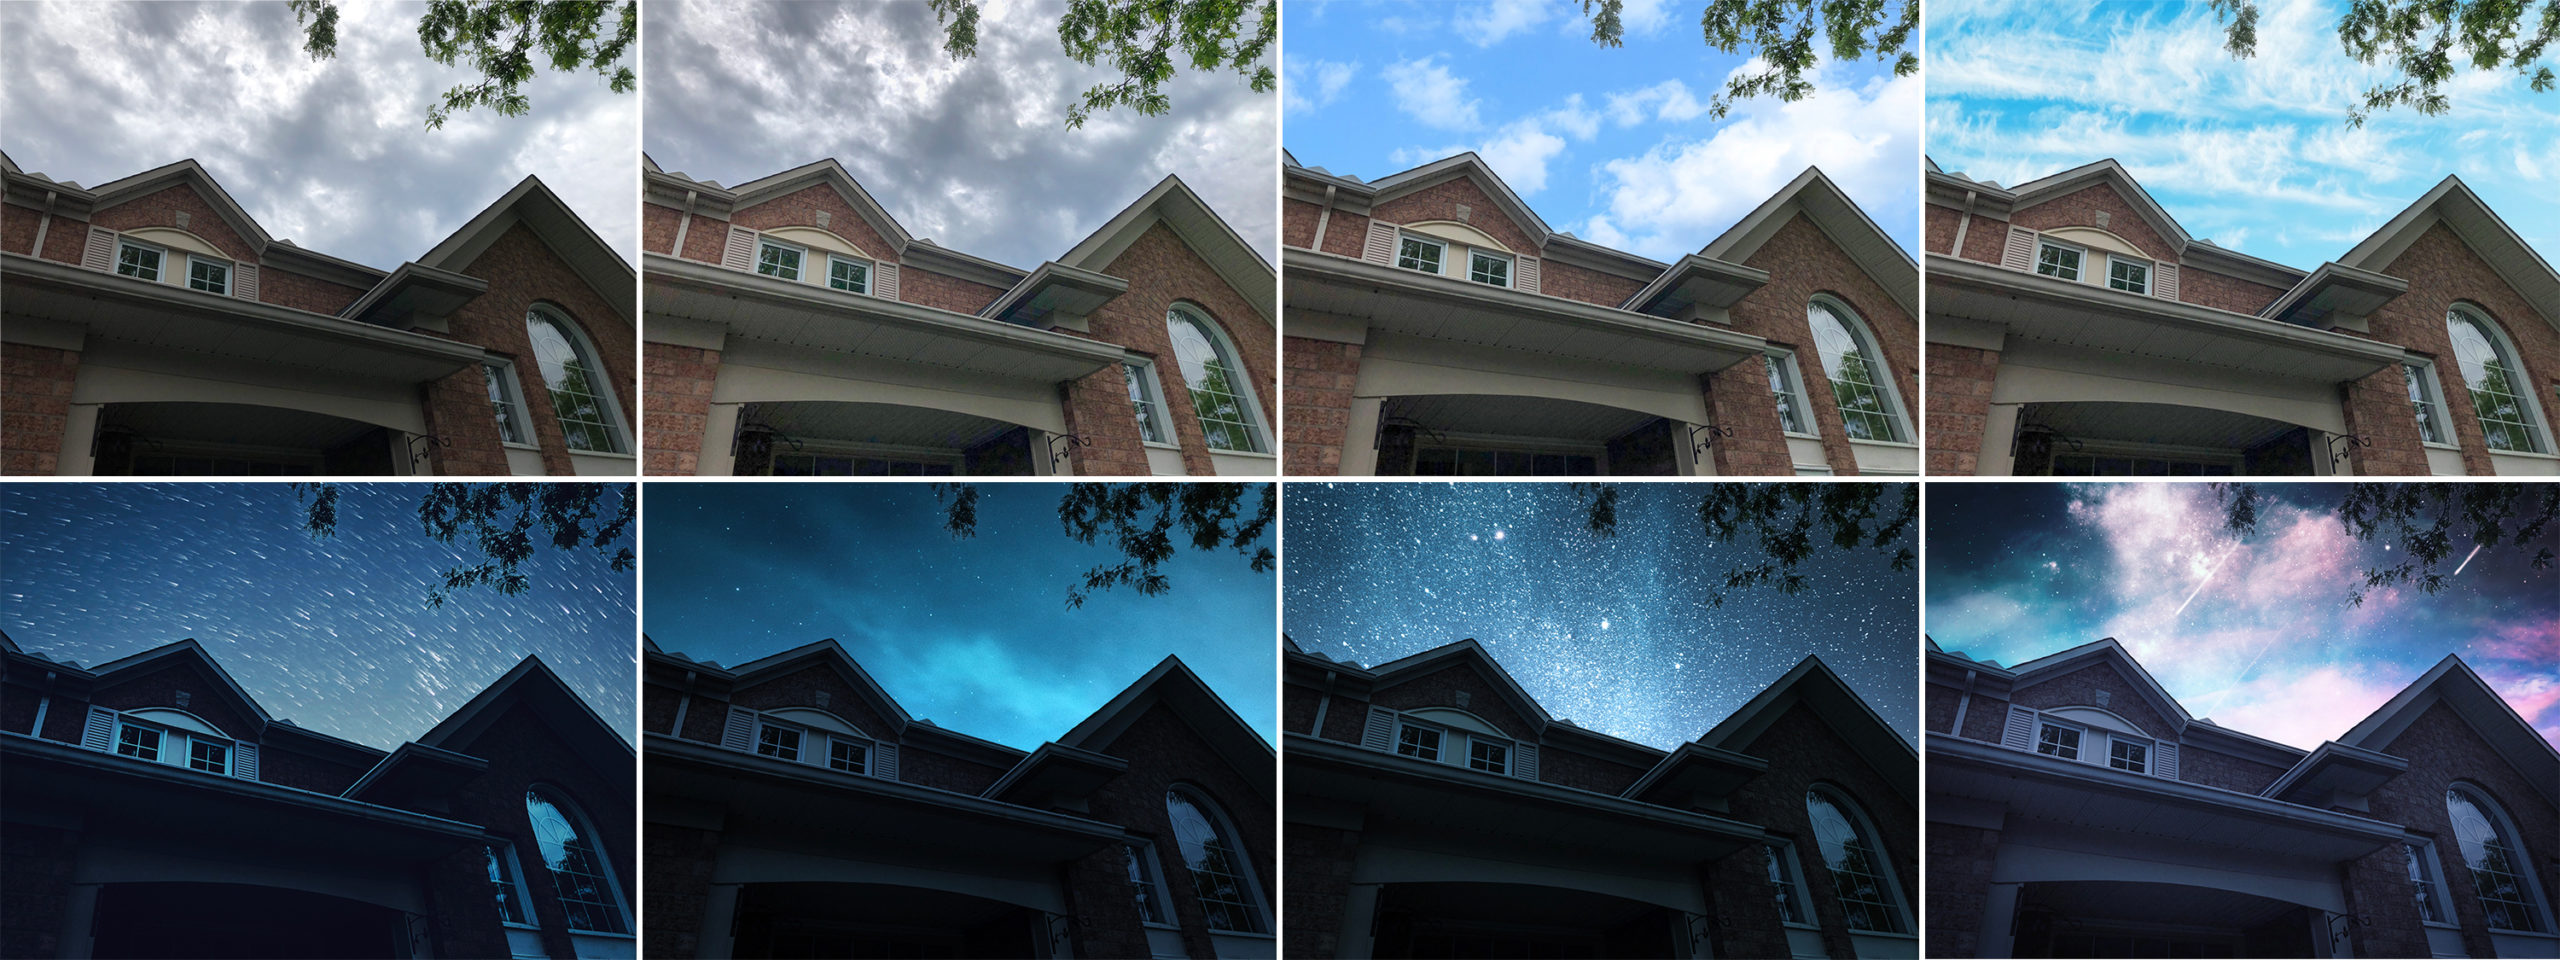 The original photo (upper left) compared to Adobe Photoshop Camera's enhanced version, and then versions where the sky has been swapped with clouds and stars. (Photo: Andrew Liszewski, Gizmodo)